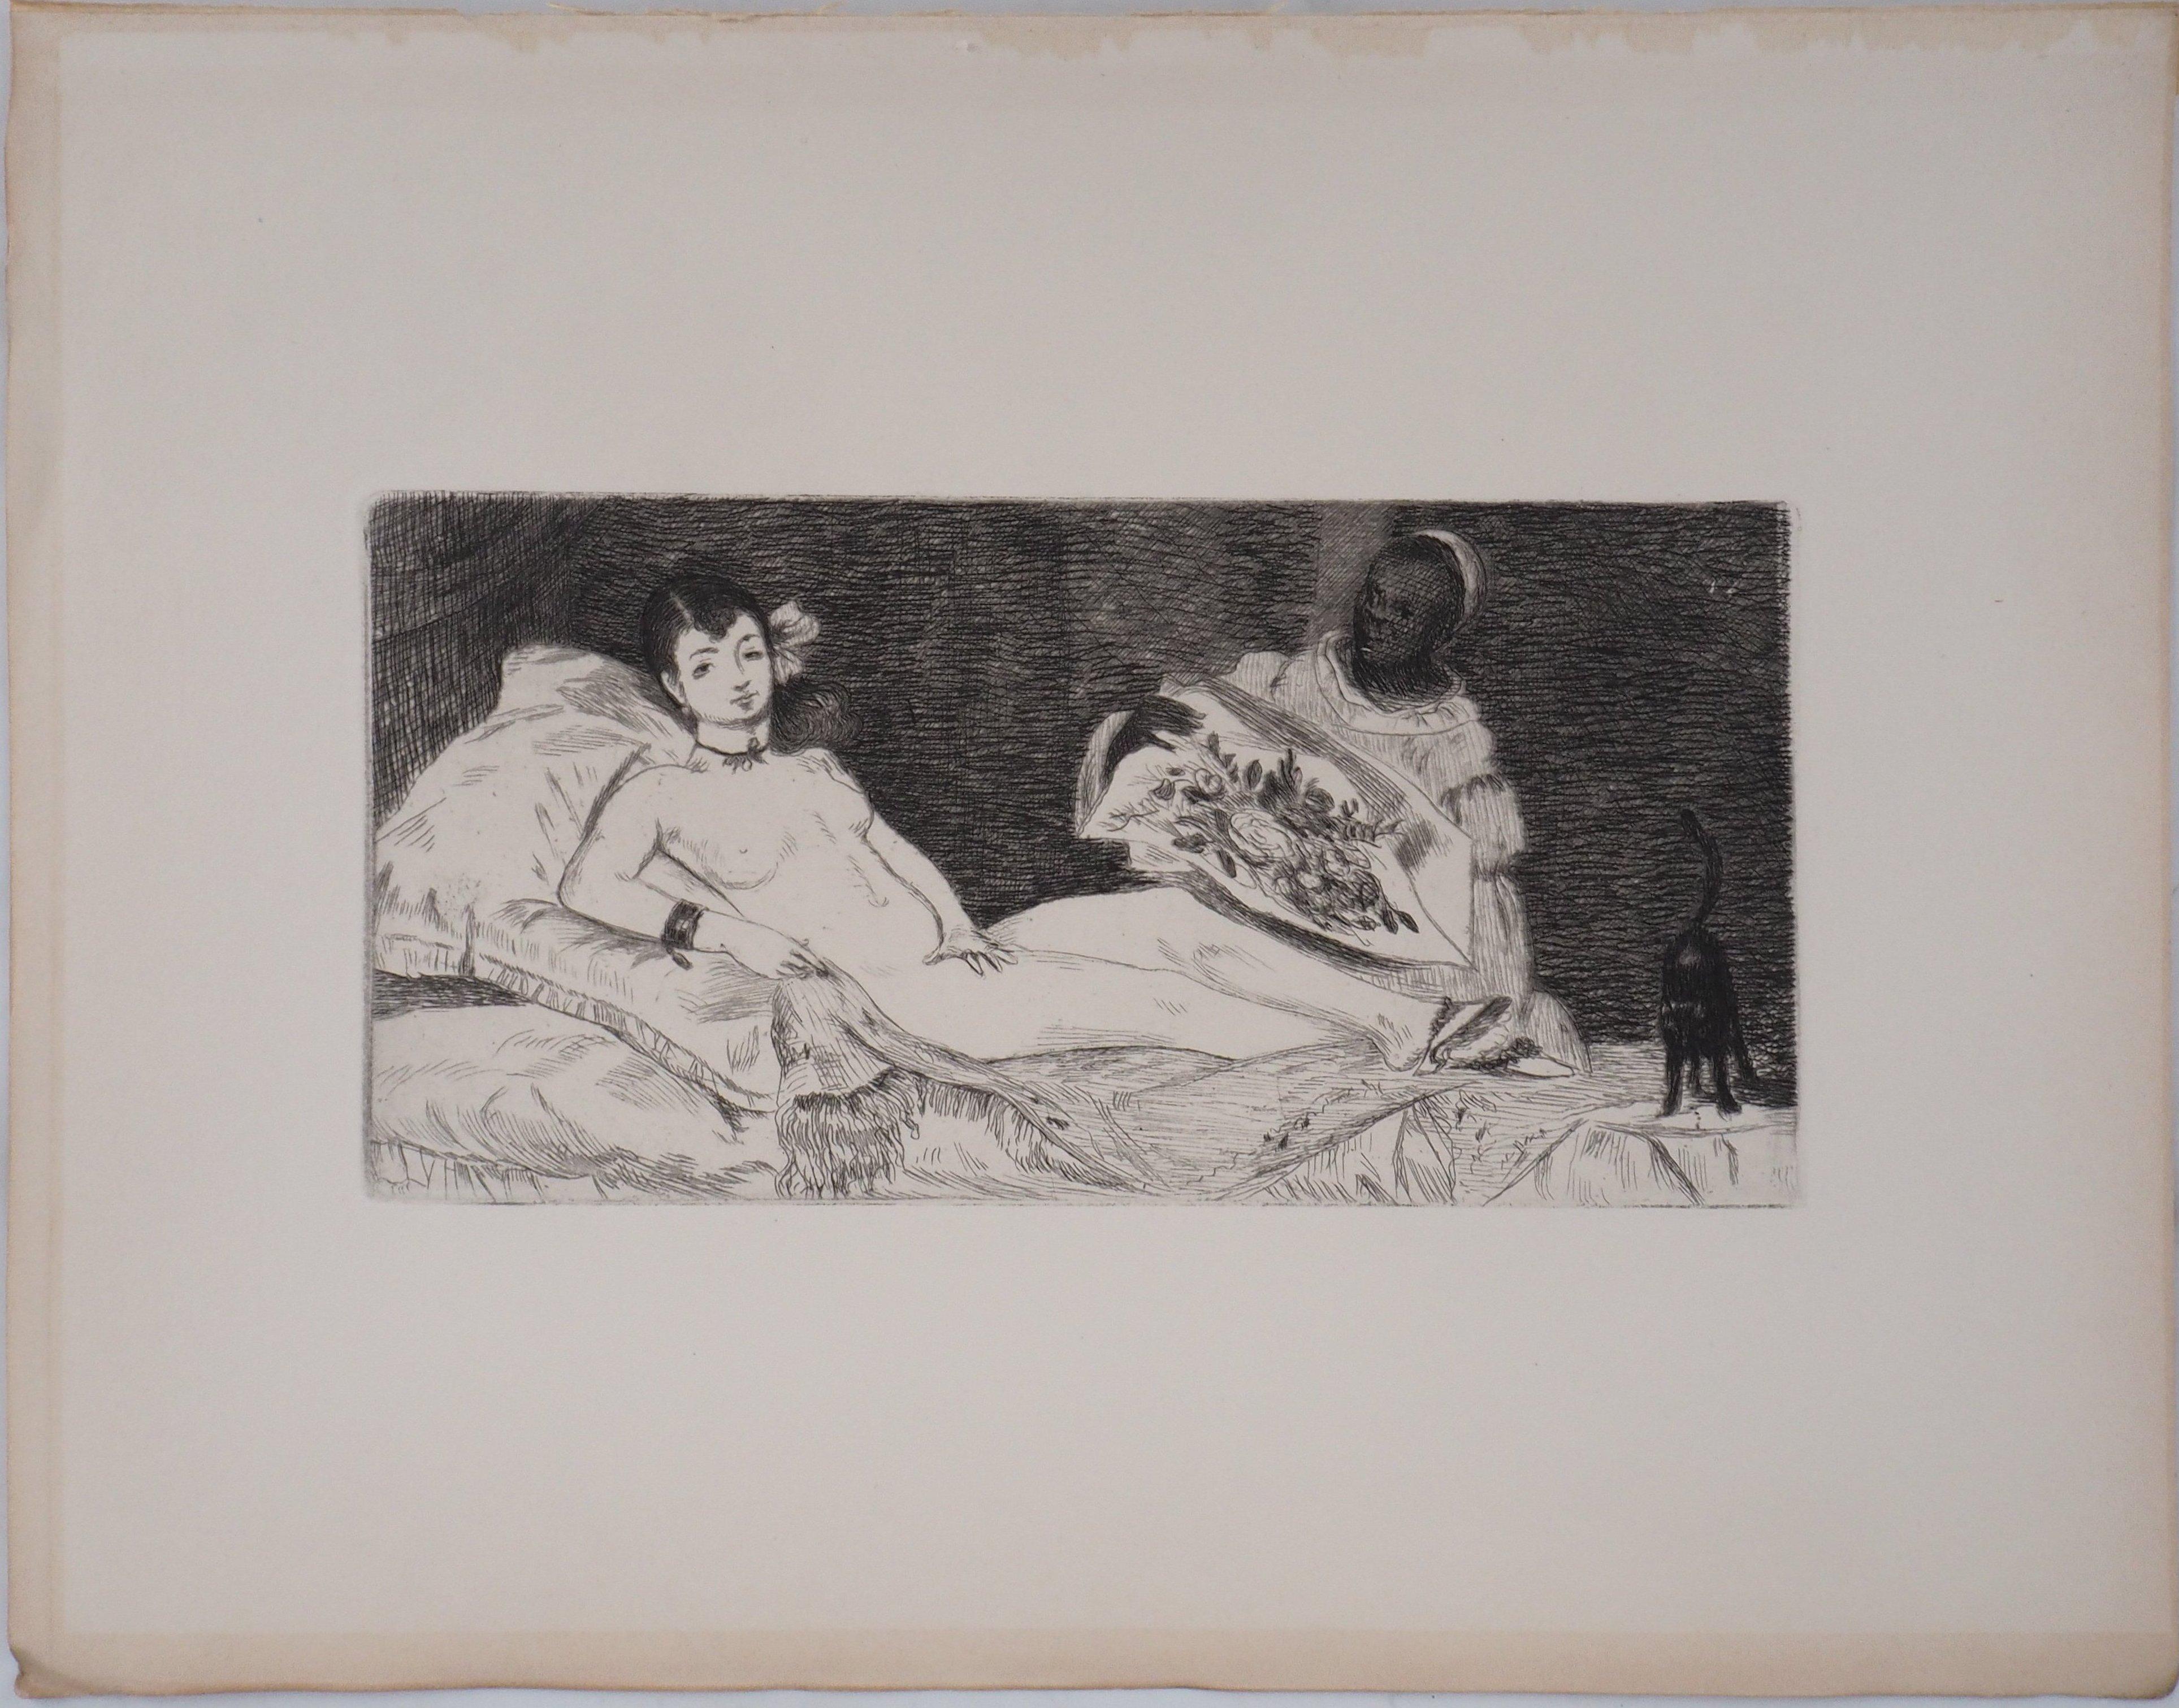 Olympia - Origninal Etching - 1902 - Impressionist Print by Edouard Manet